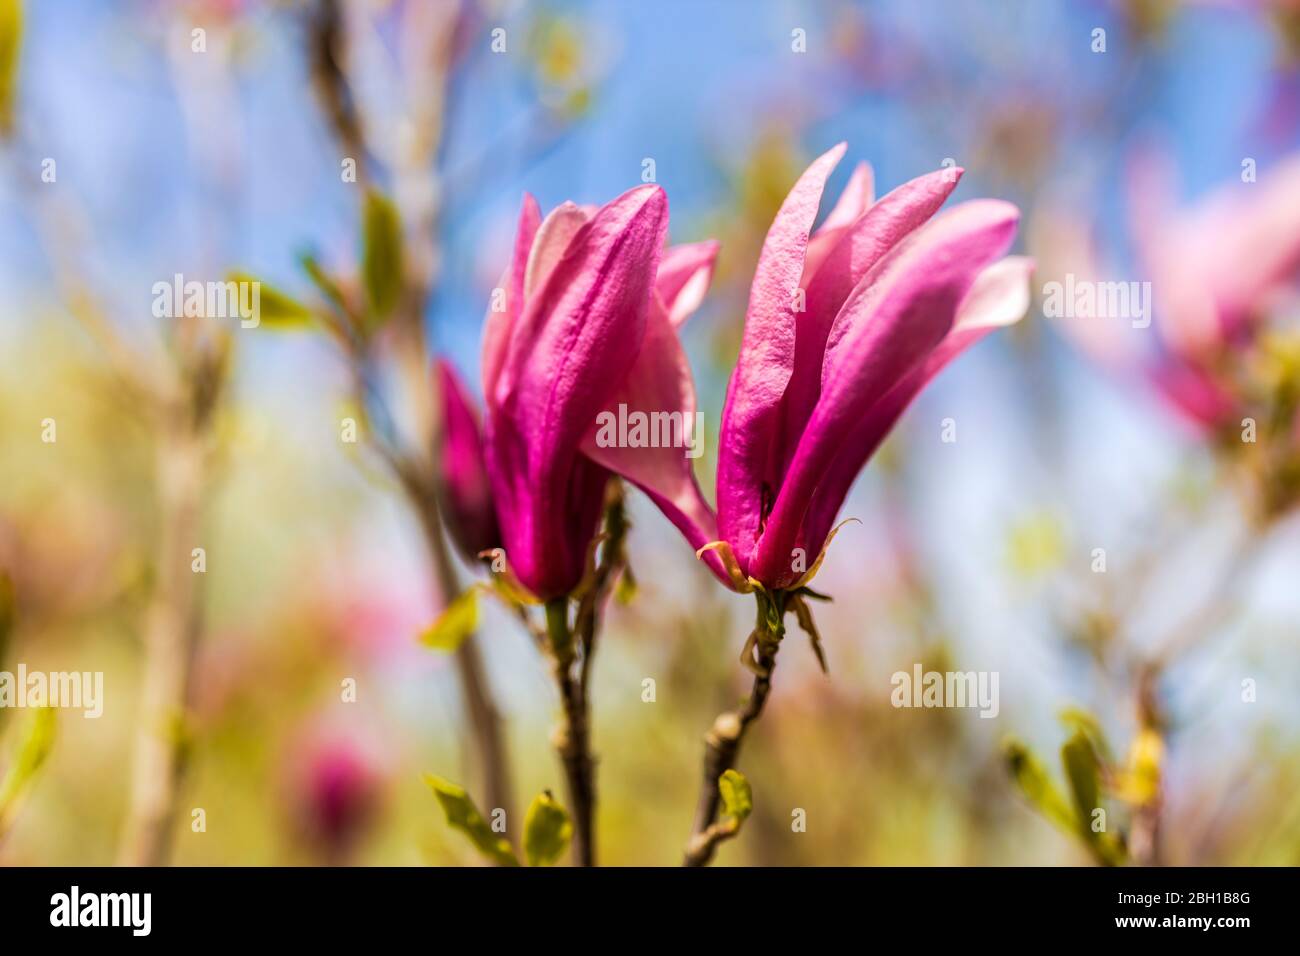 Magnolia flower bloom on background of blurry Magnolia flowers on Magnolia tree. Stock Photo